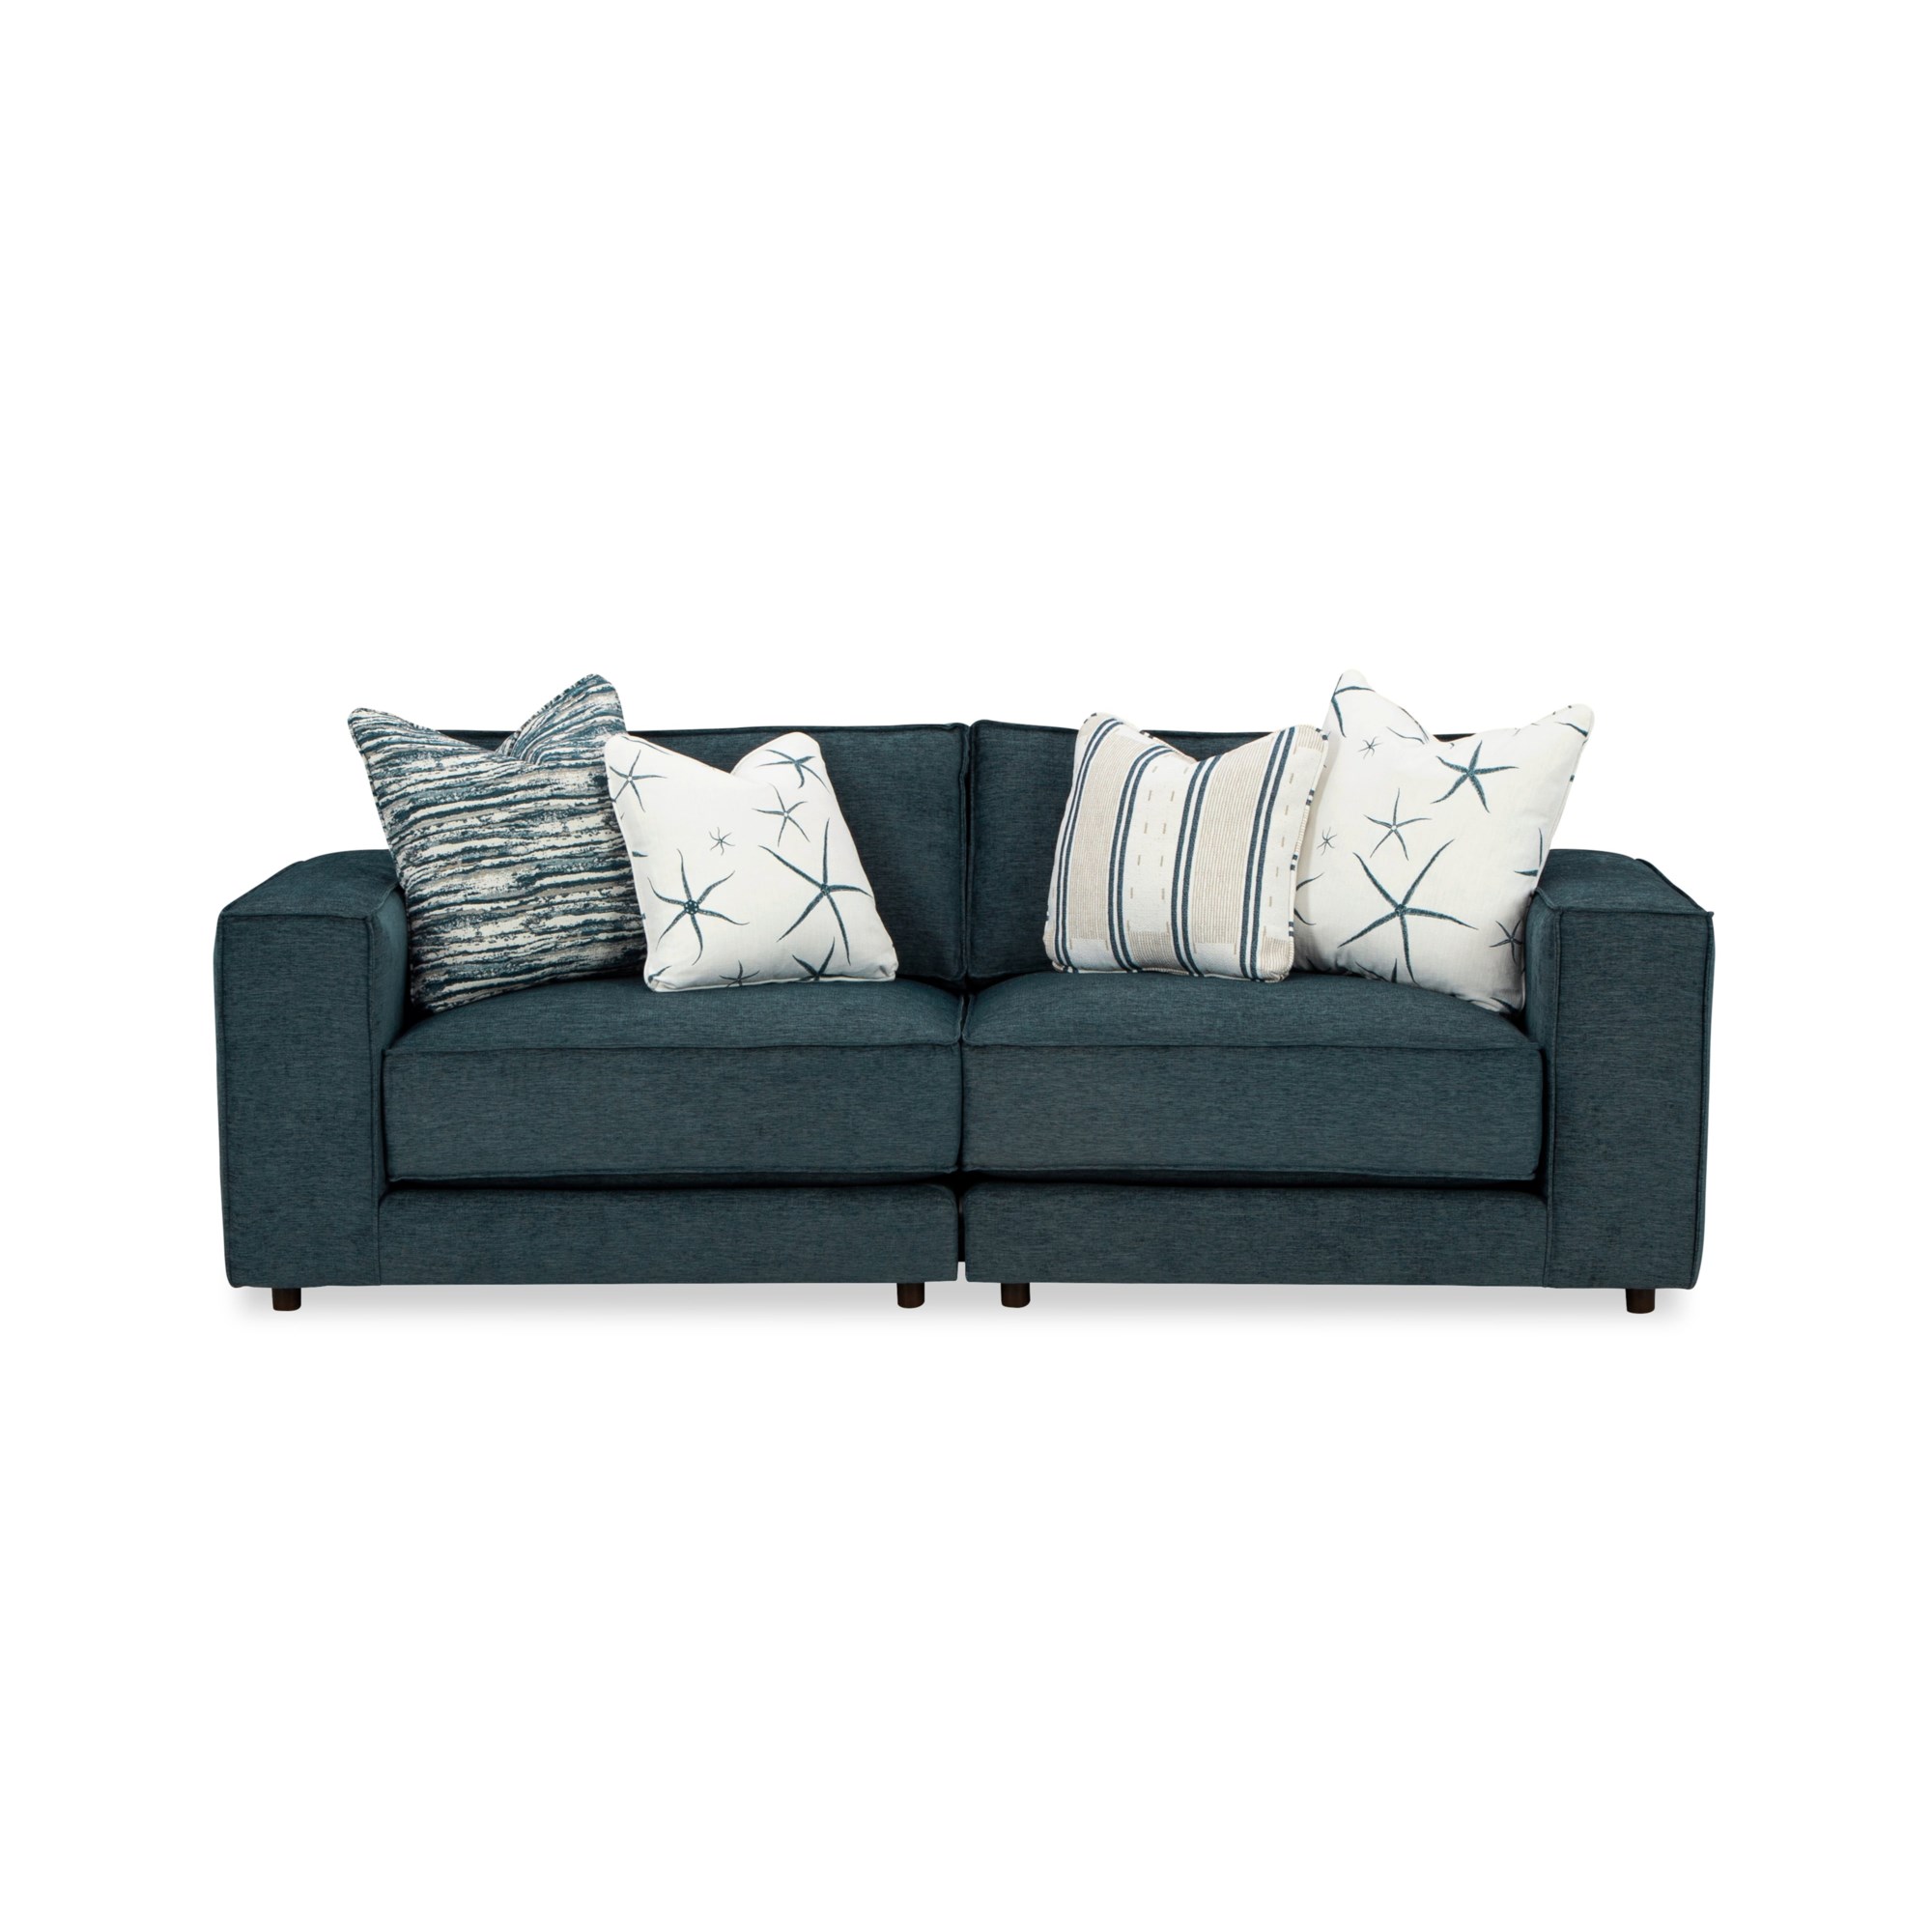 | Home Contemporary Seats | - Furniture Stationary Modular 2 Uph Collections 734801BD ROBBIE-23 Craftmaster Sofa 734819BDx1+734818BDx1 with Sofas